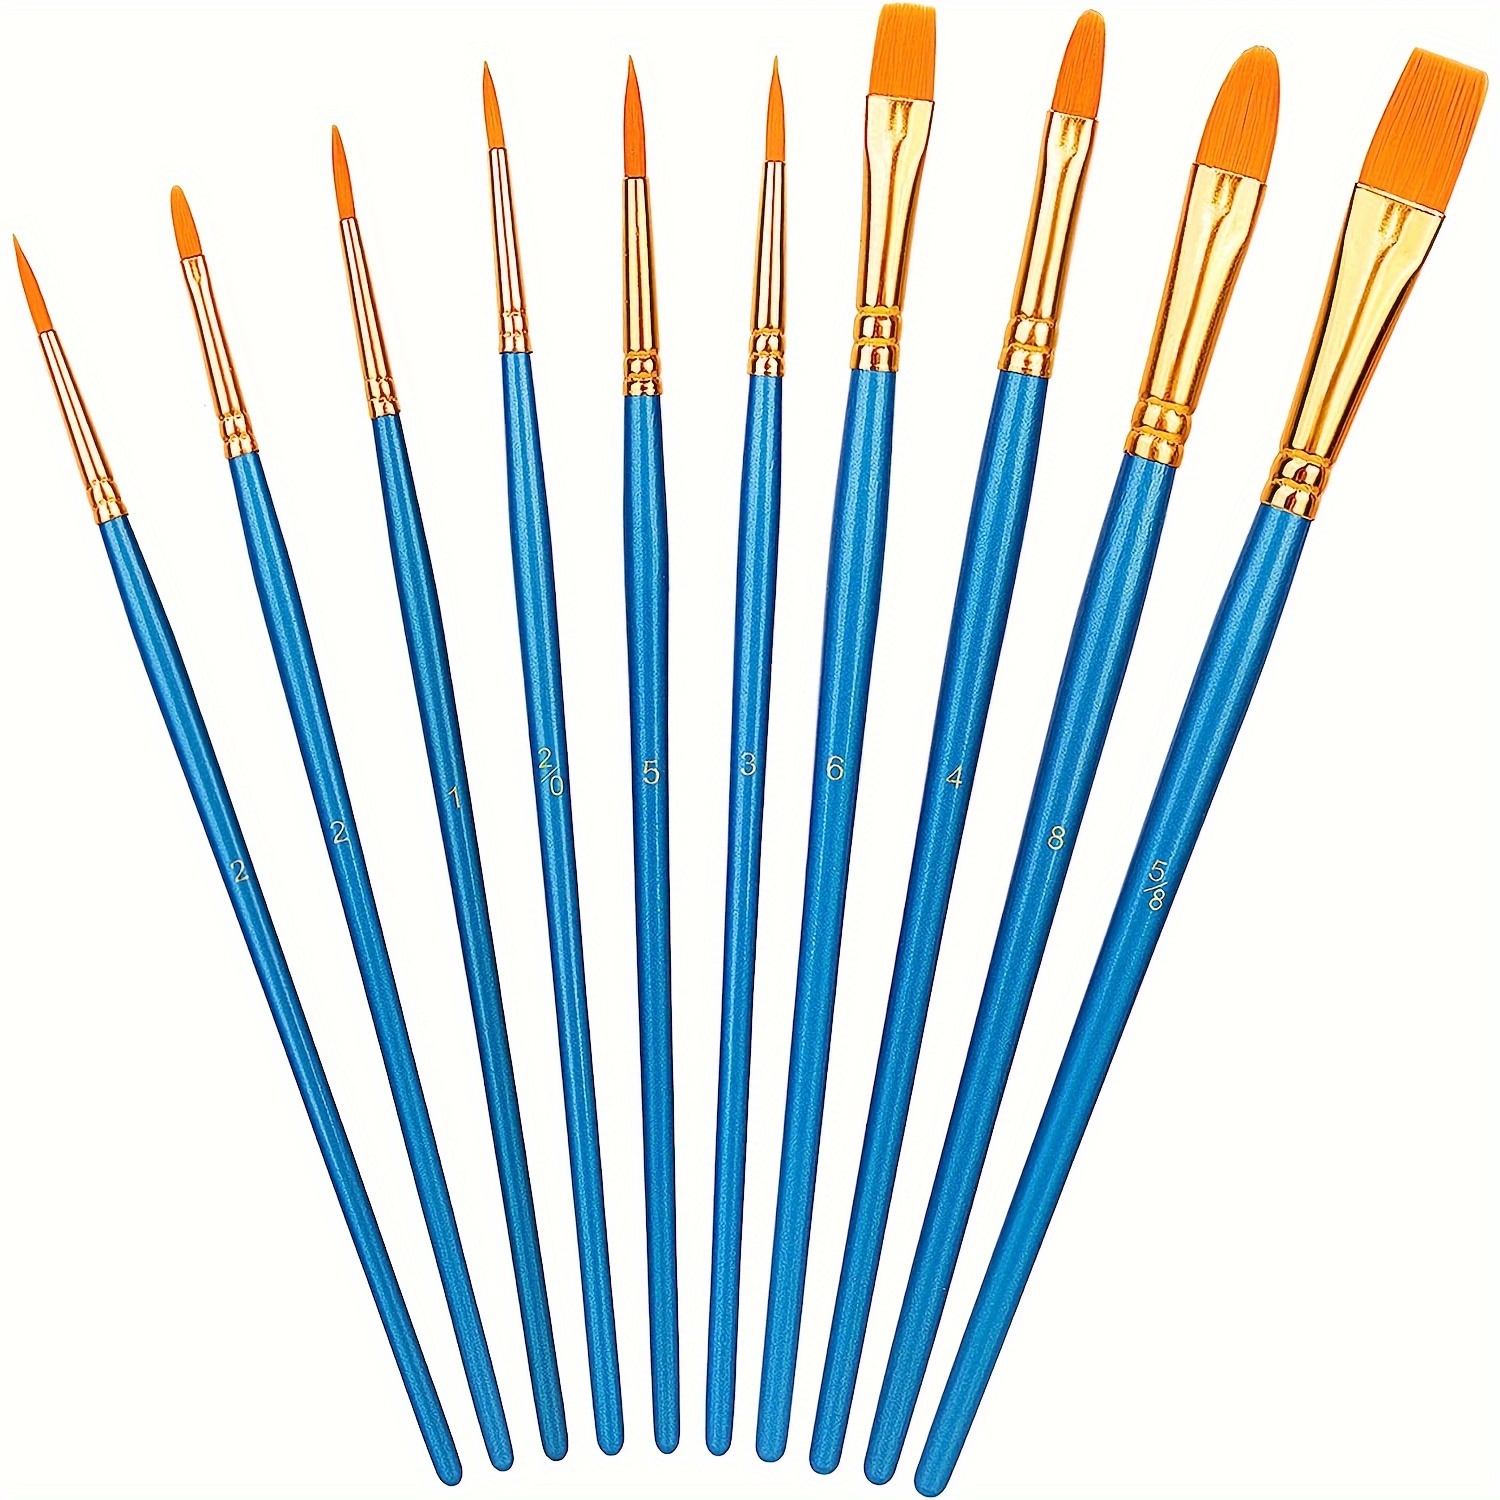 50 Pcs Flat Paint Brushes for Touch Up, Anezus Small Paint Brushes for  Classroom Crafts Paint Brushes for Acrylic Painting Watercolor Canvas Face